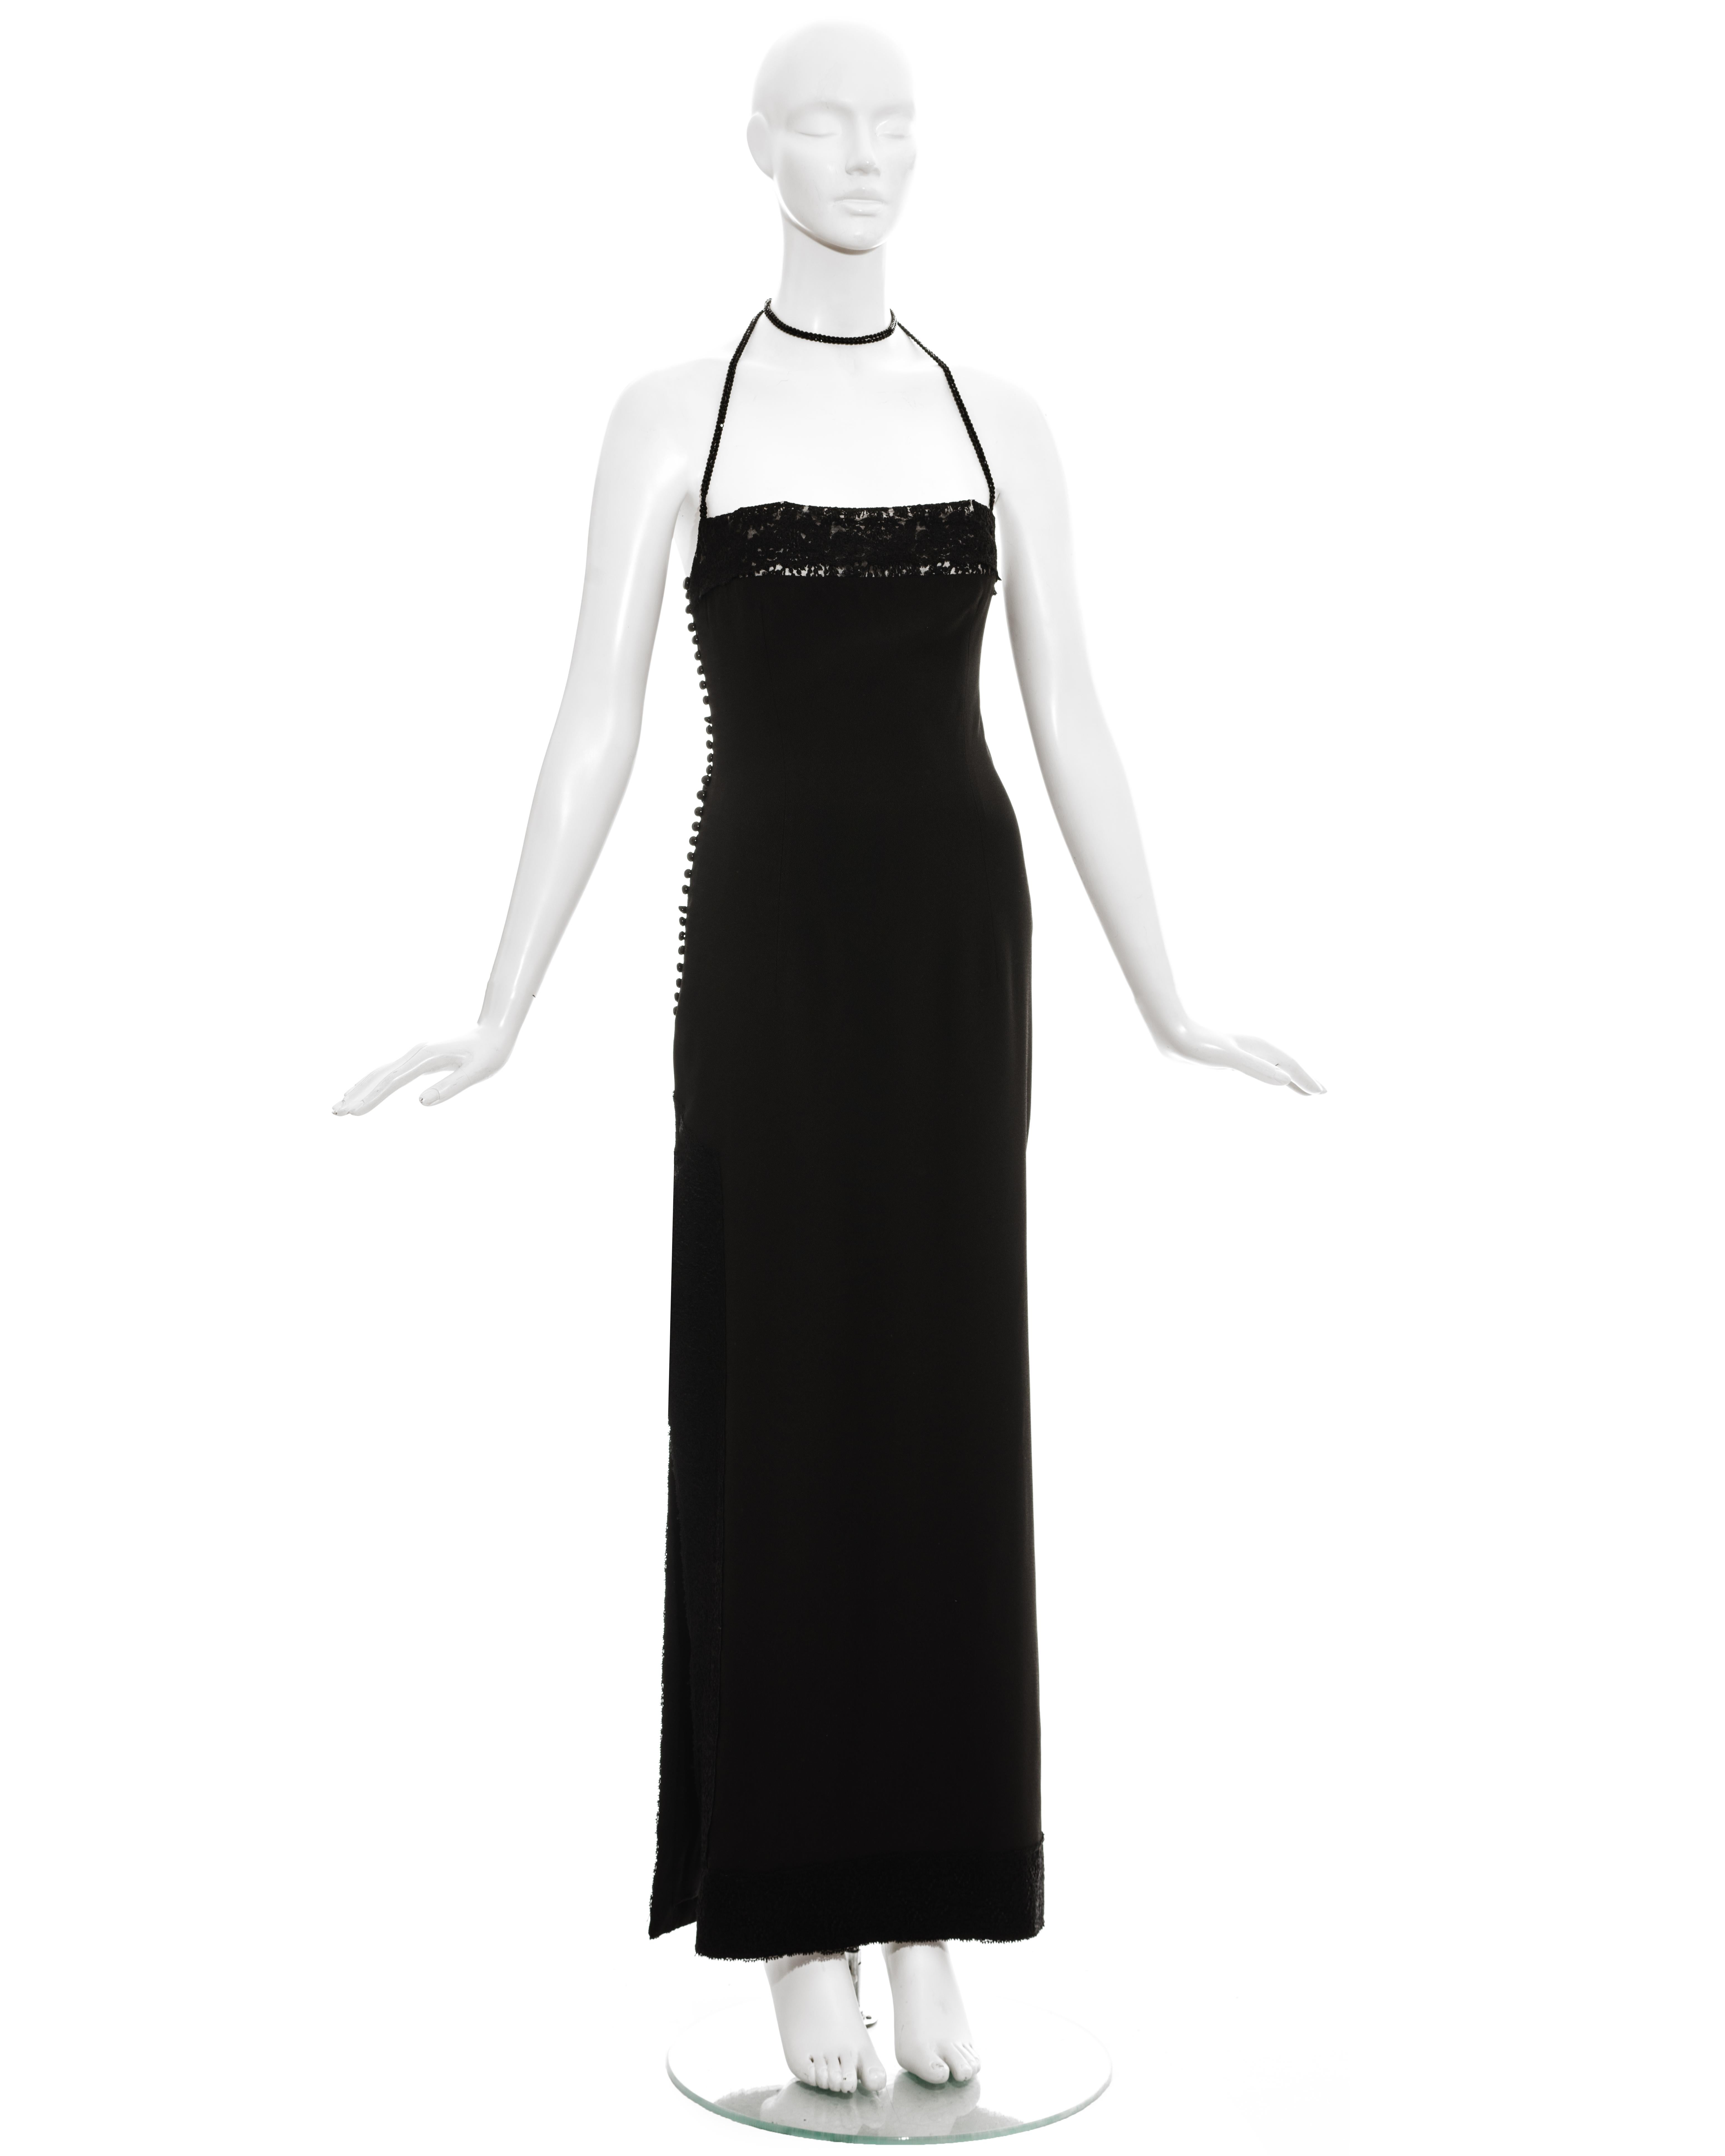 Christian Dior by John Galliano black silk crepe evening dress with high leg slit, lace trim and attached beaded choker necklace. 

Fall-Winter 1997